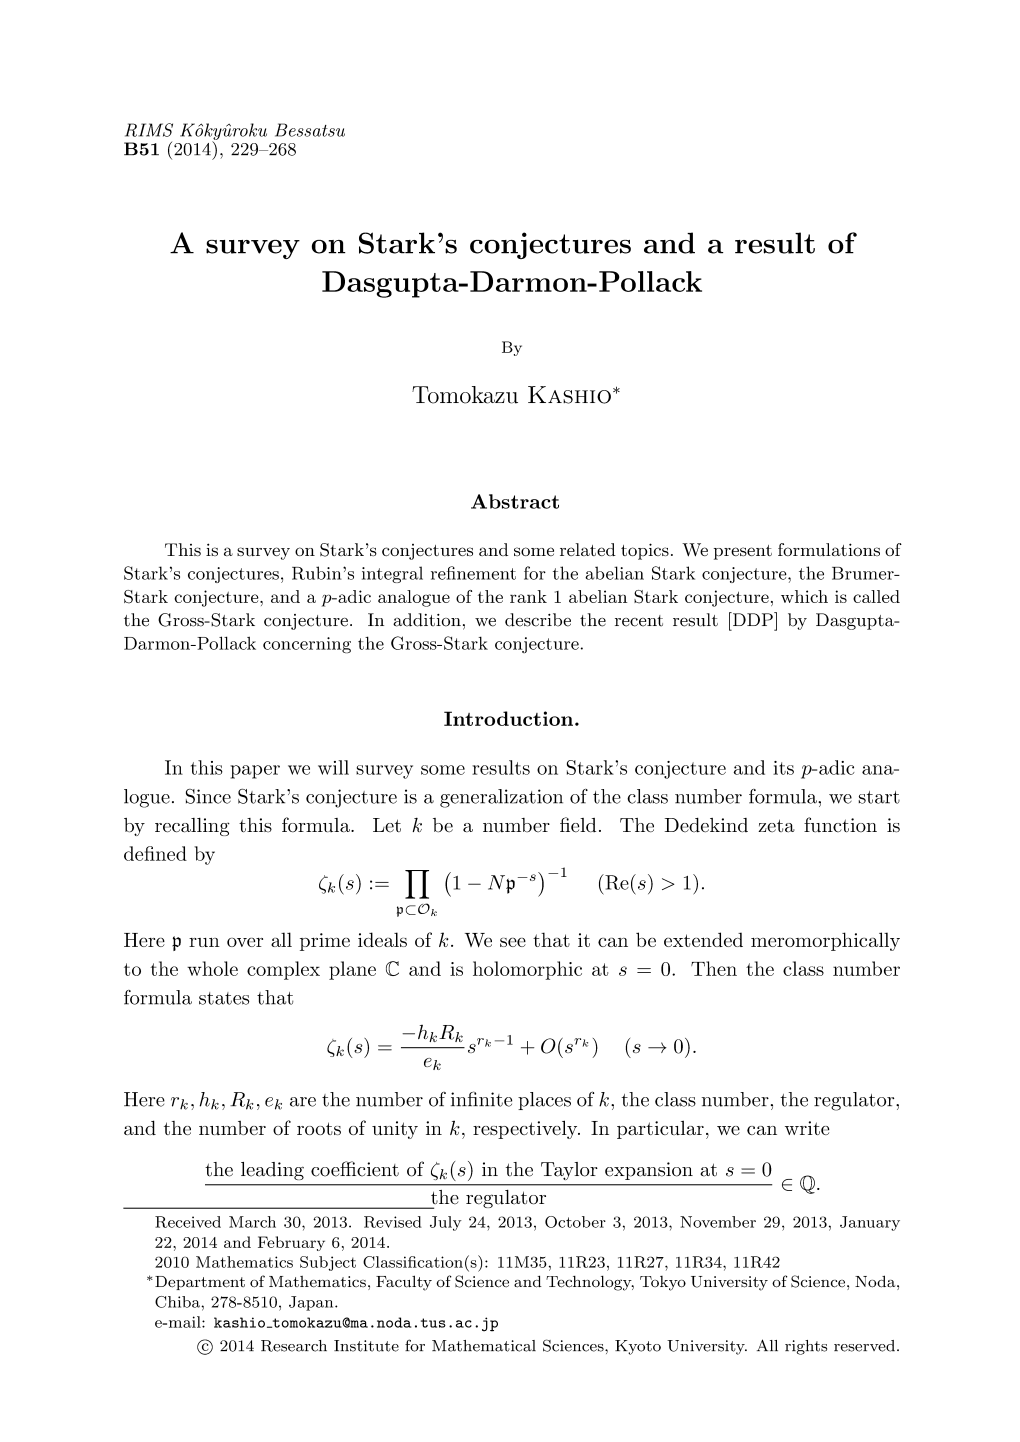 A Survey on Stark's Conjectures and a Result of Dasgupta-Darmon-Pollack